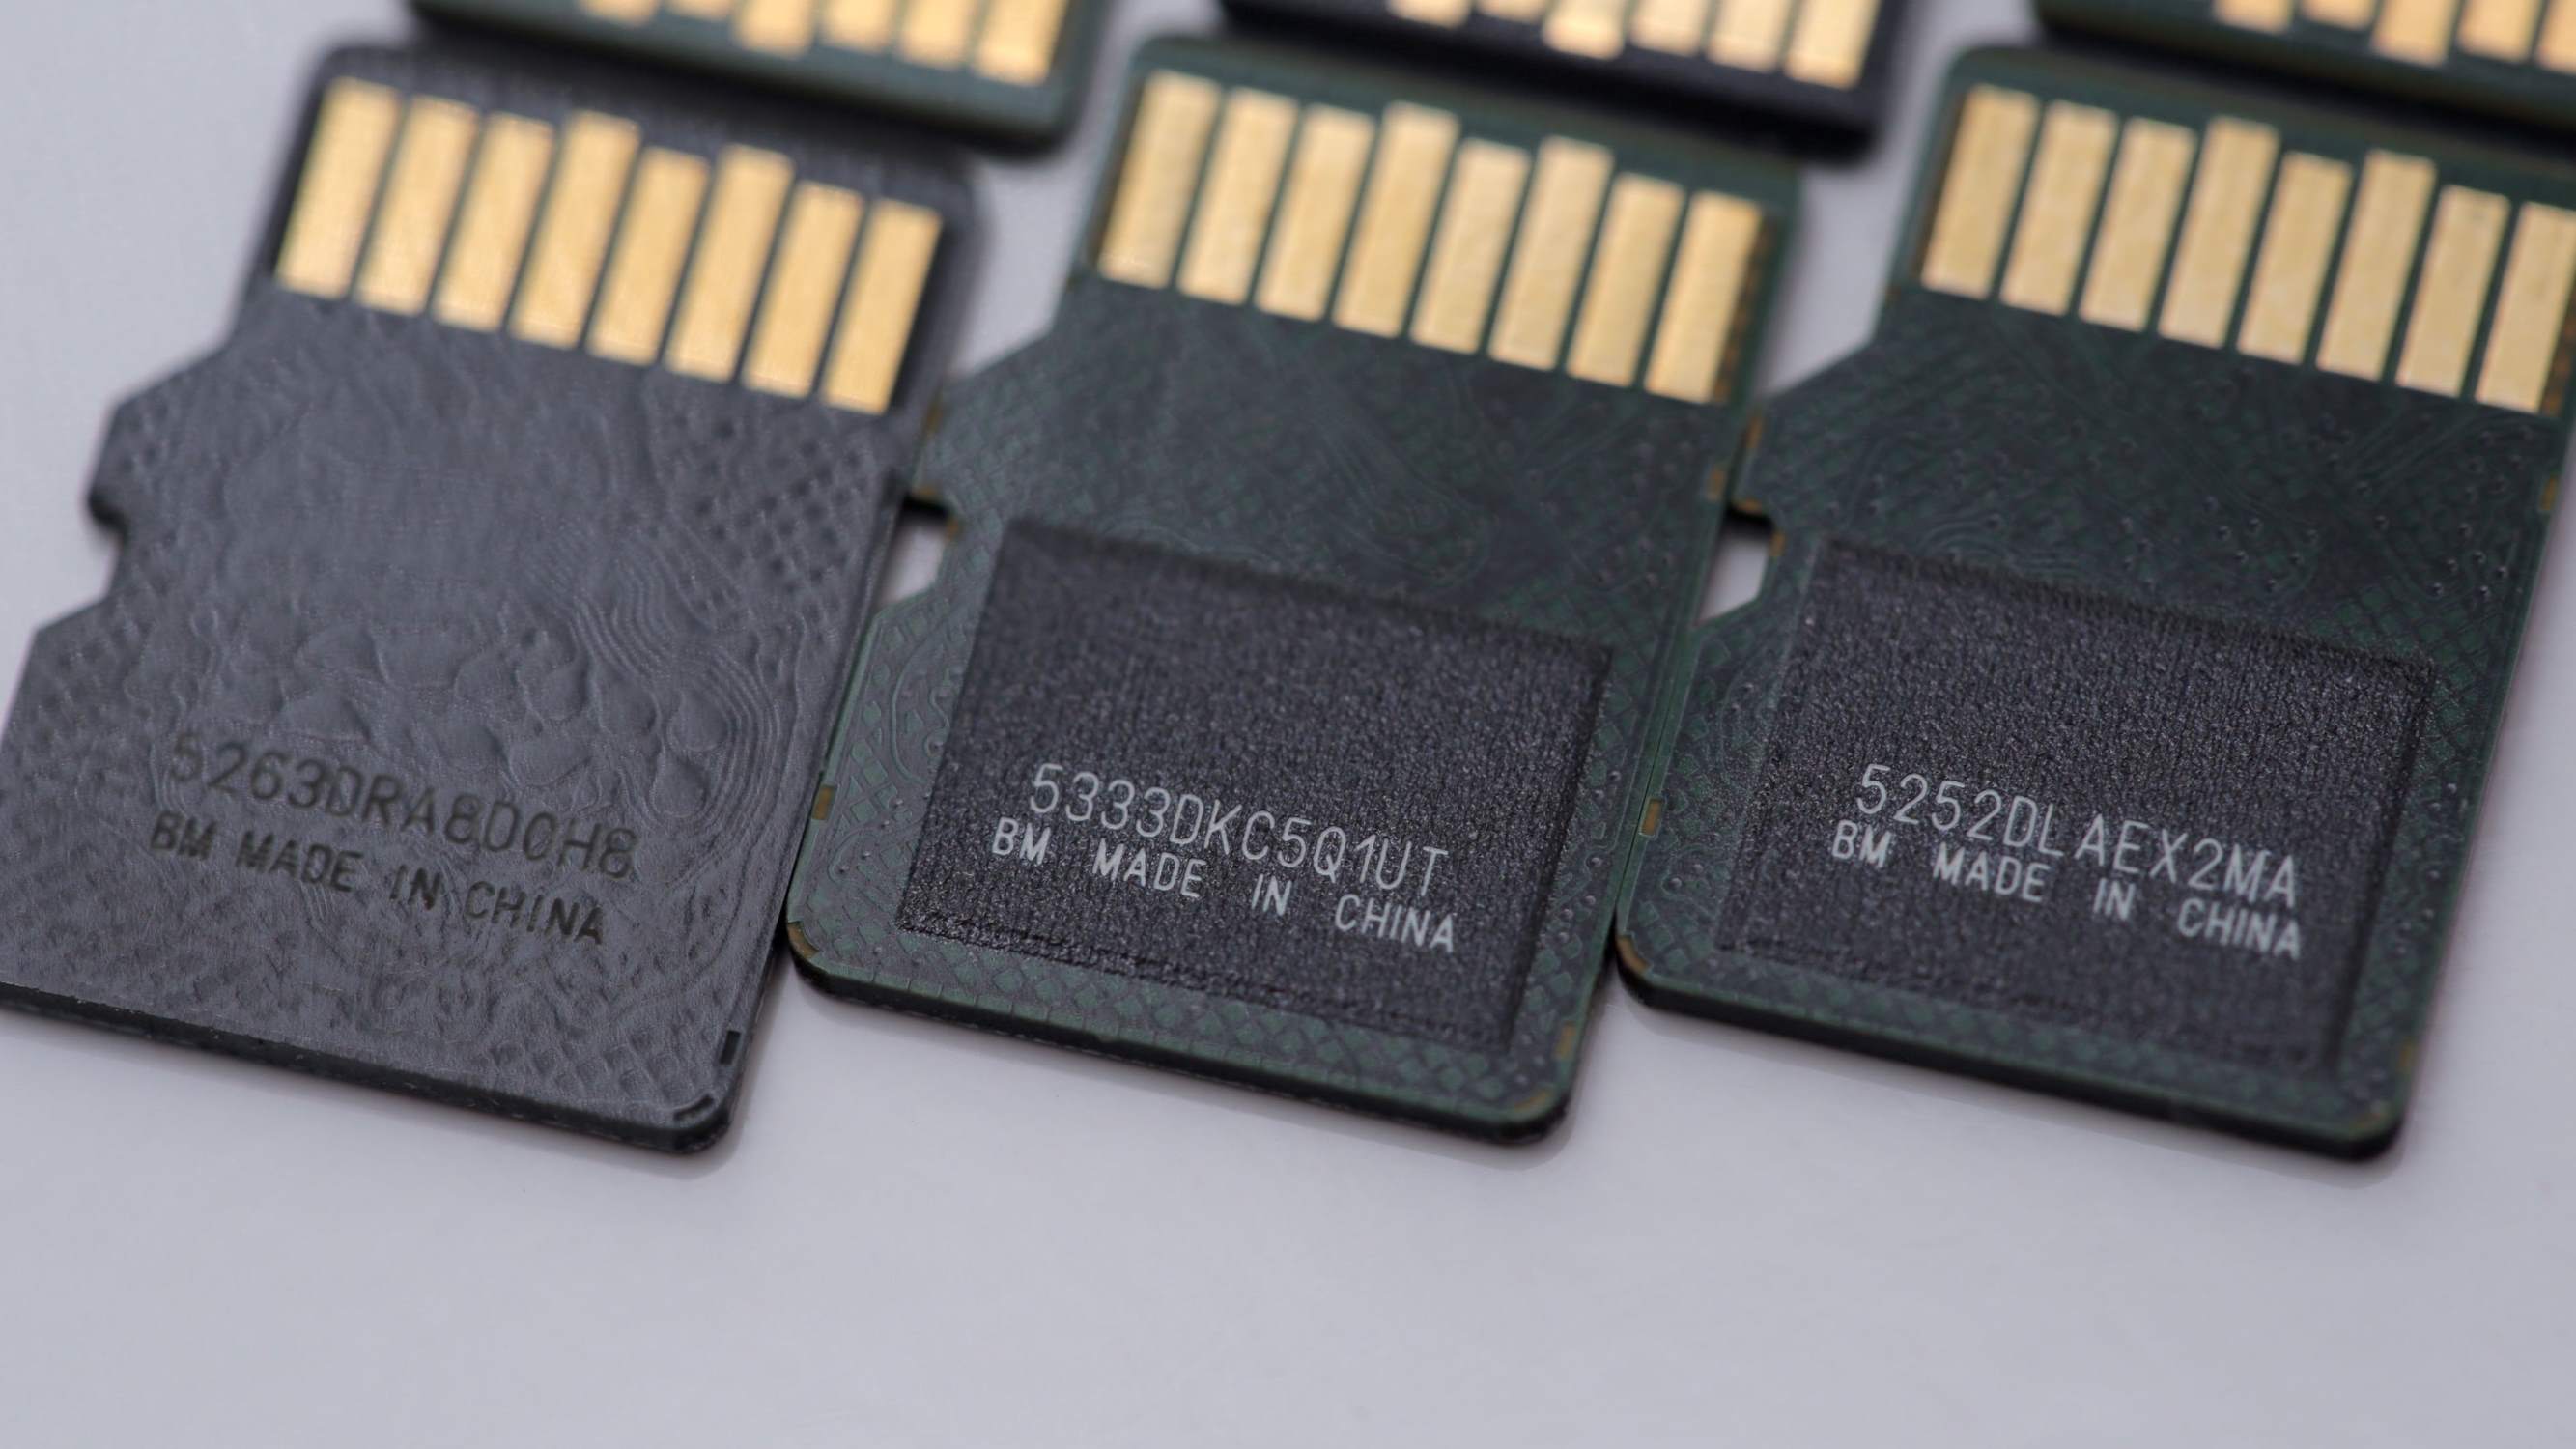 What is a Memory Card? | CellularNews